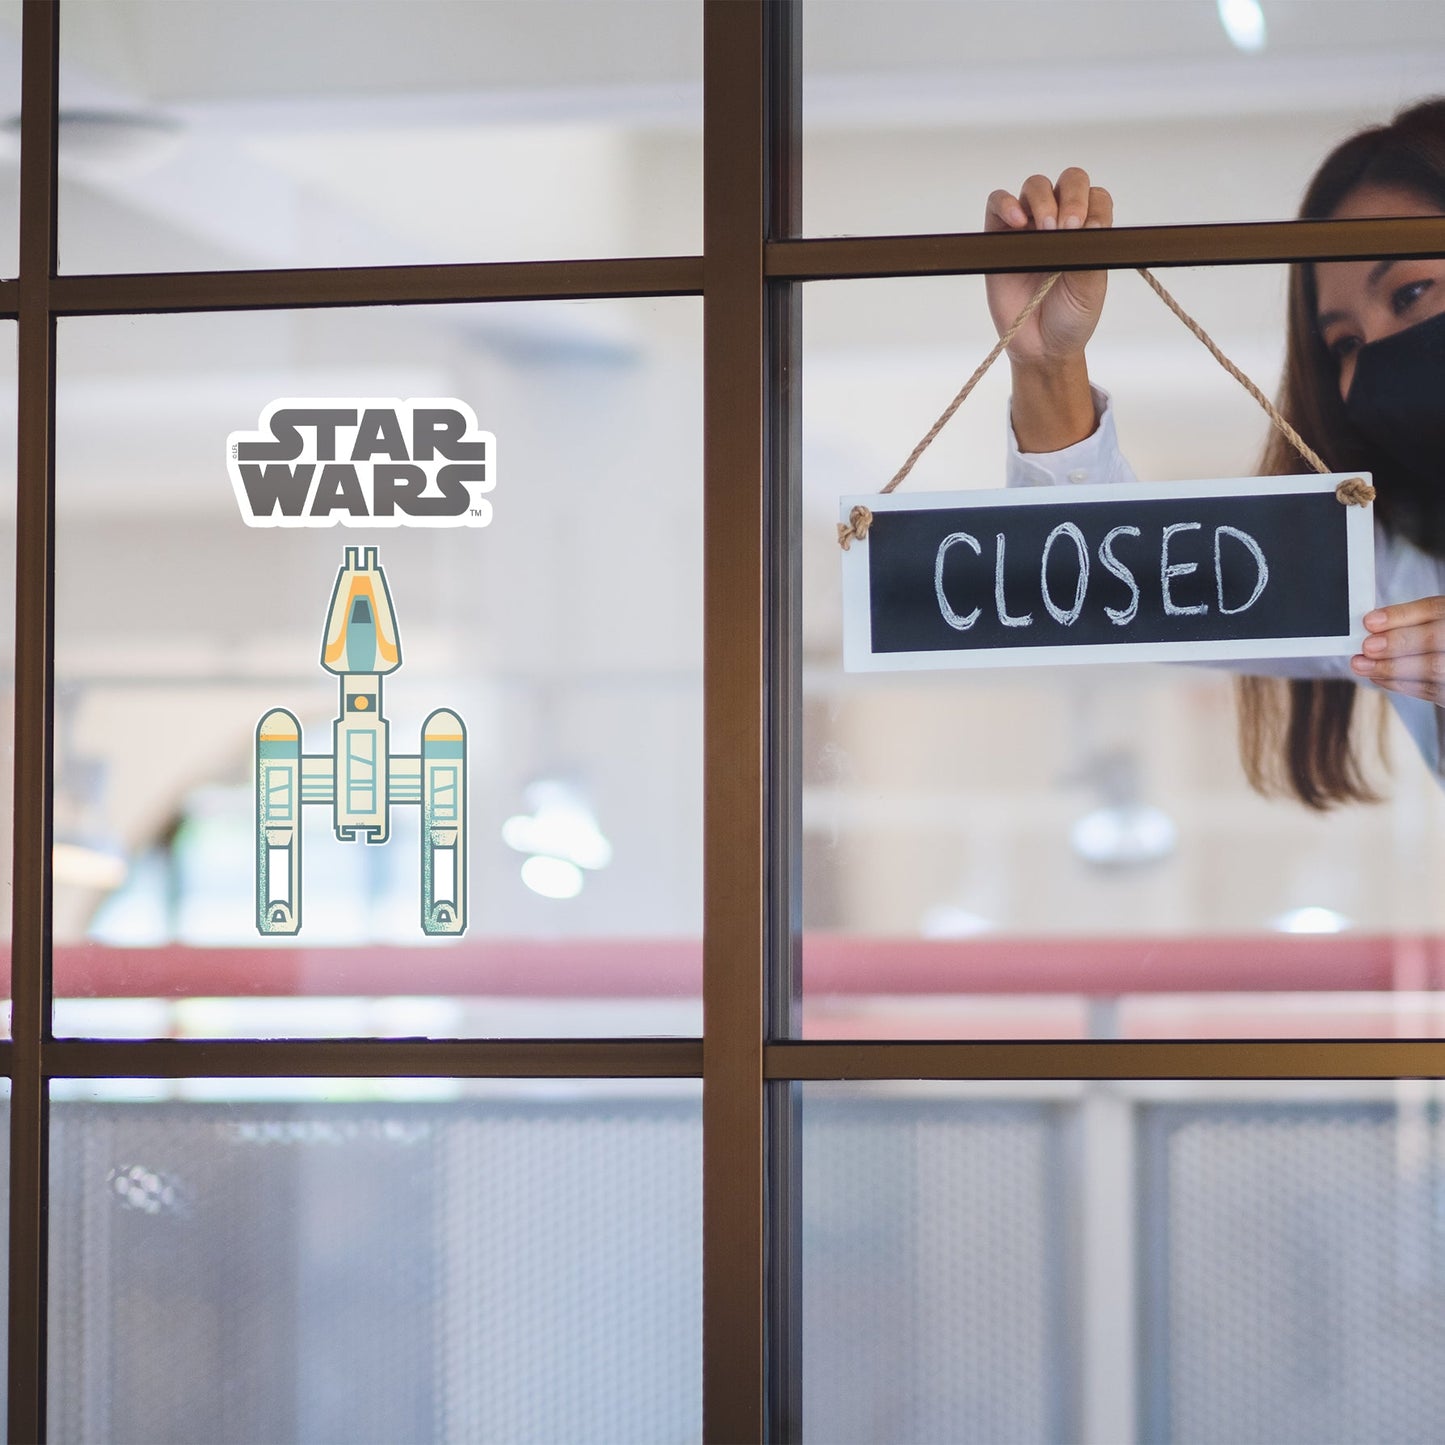 Star Wars: Y-Wing Window Clings - Officially Licensed Disney Removable Window Static Decal